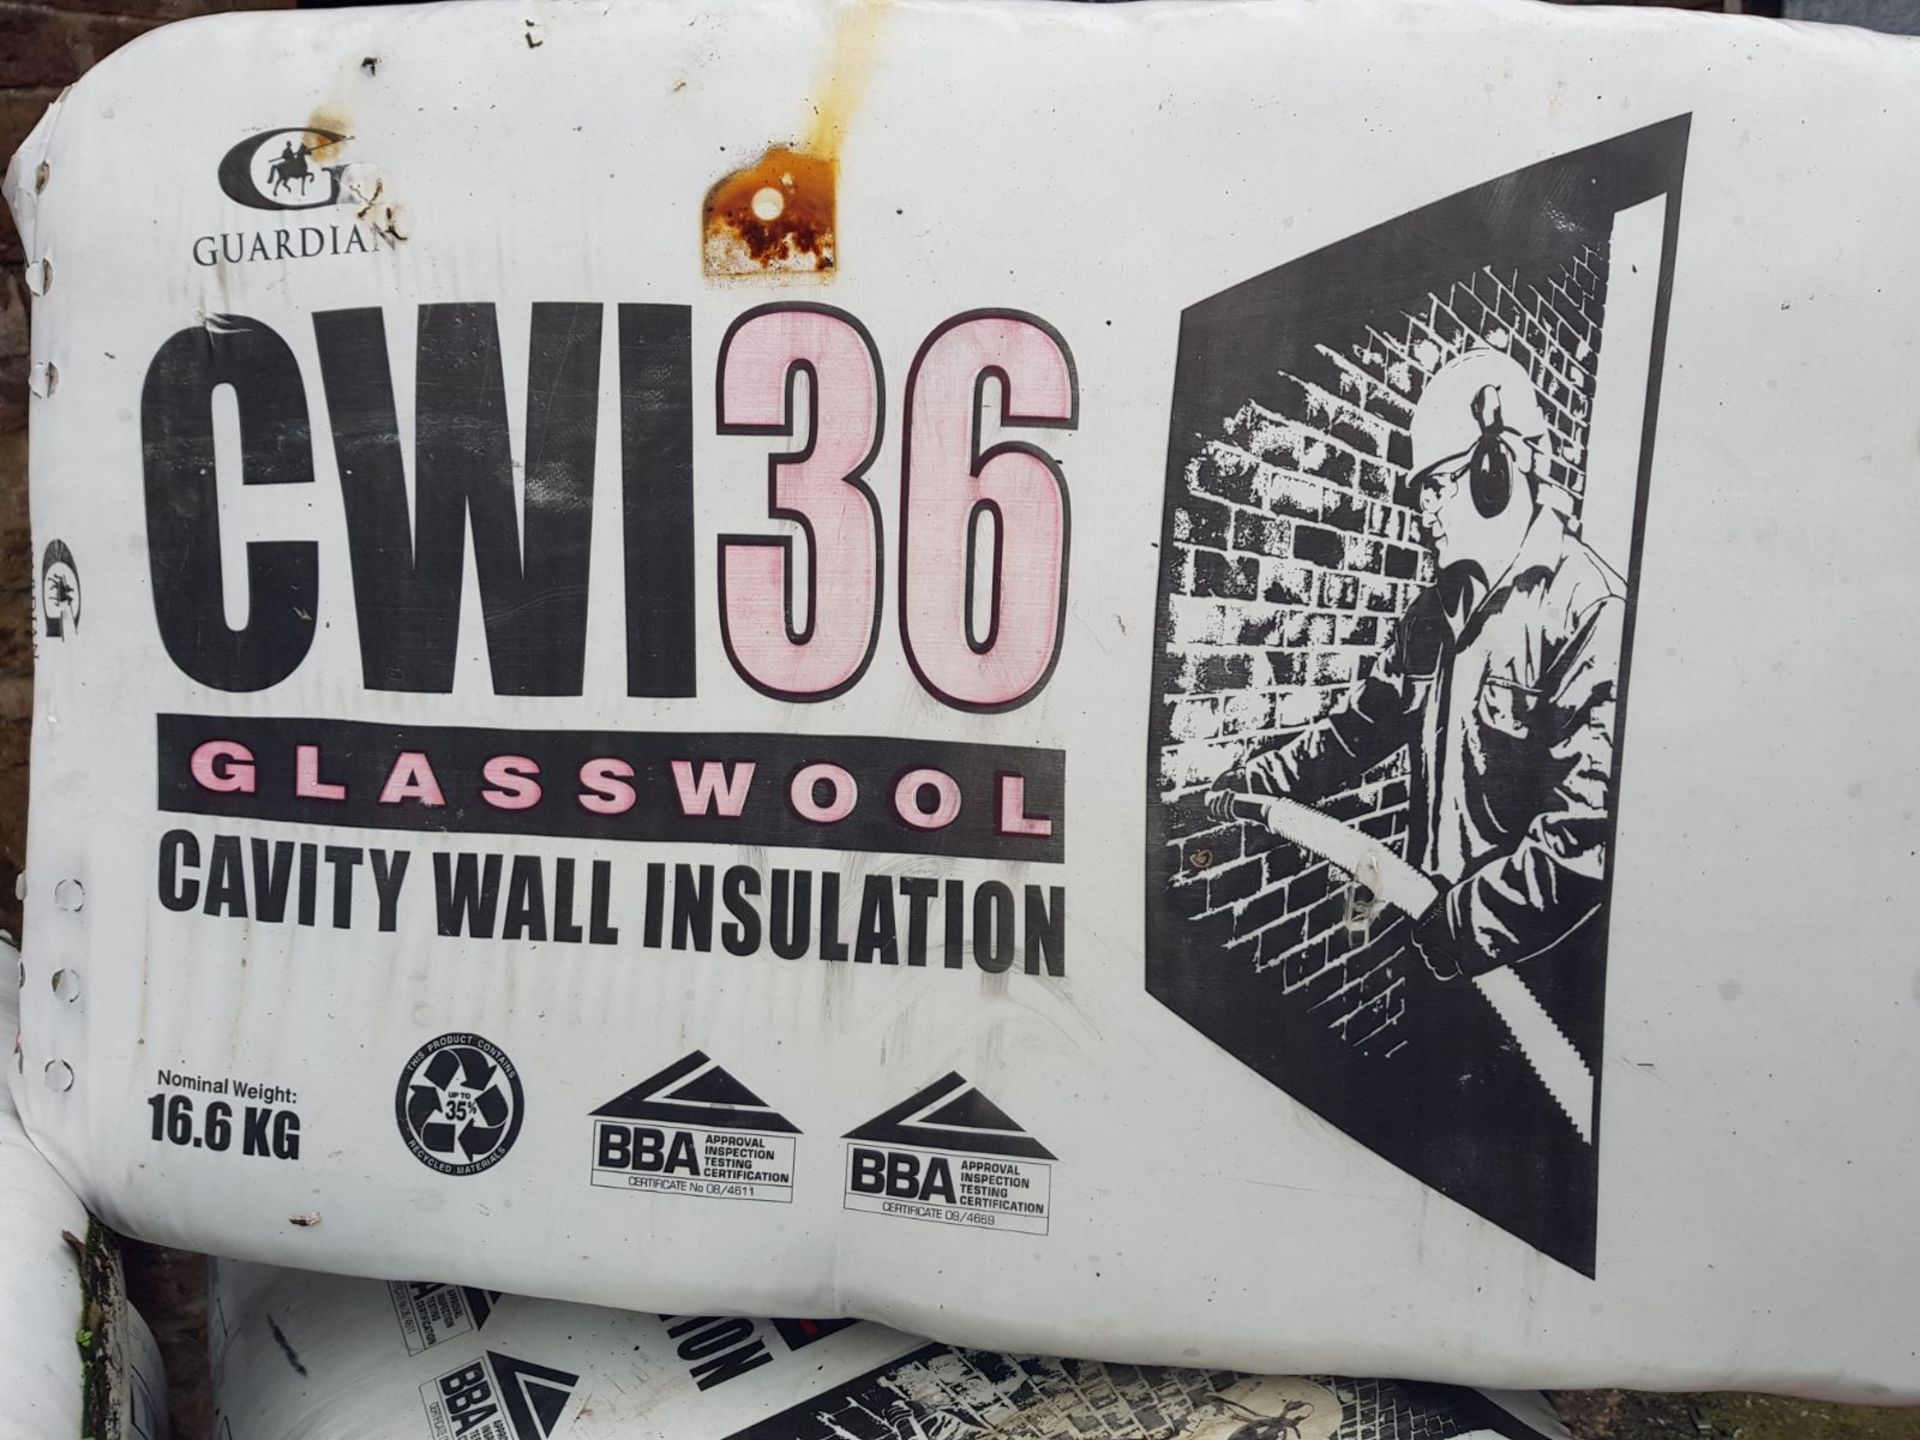 CWI 36 GLASSWOOL CAVITY WALL INSULATION *NO VAT* - Image 2 of 2